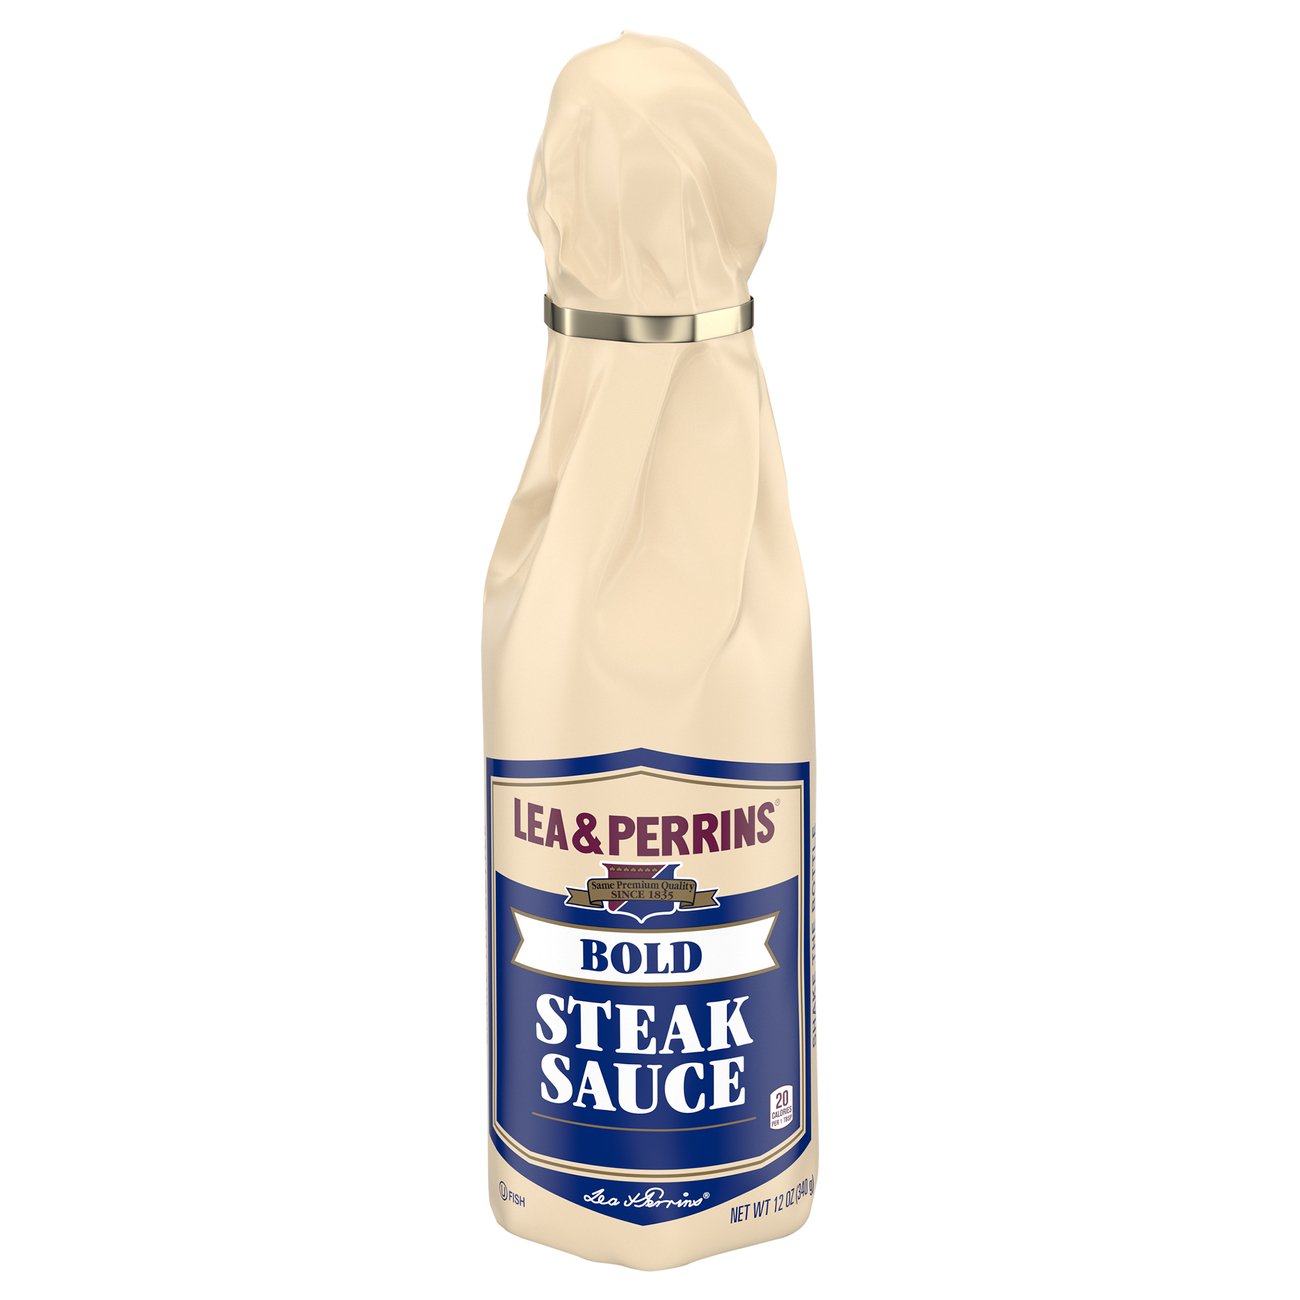 Lea Perrins Bold Steak Sauce Shop Steak Sauce At H E B,Types Of Birch Trees In New England